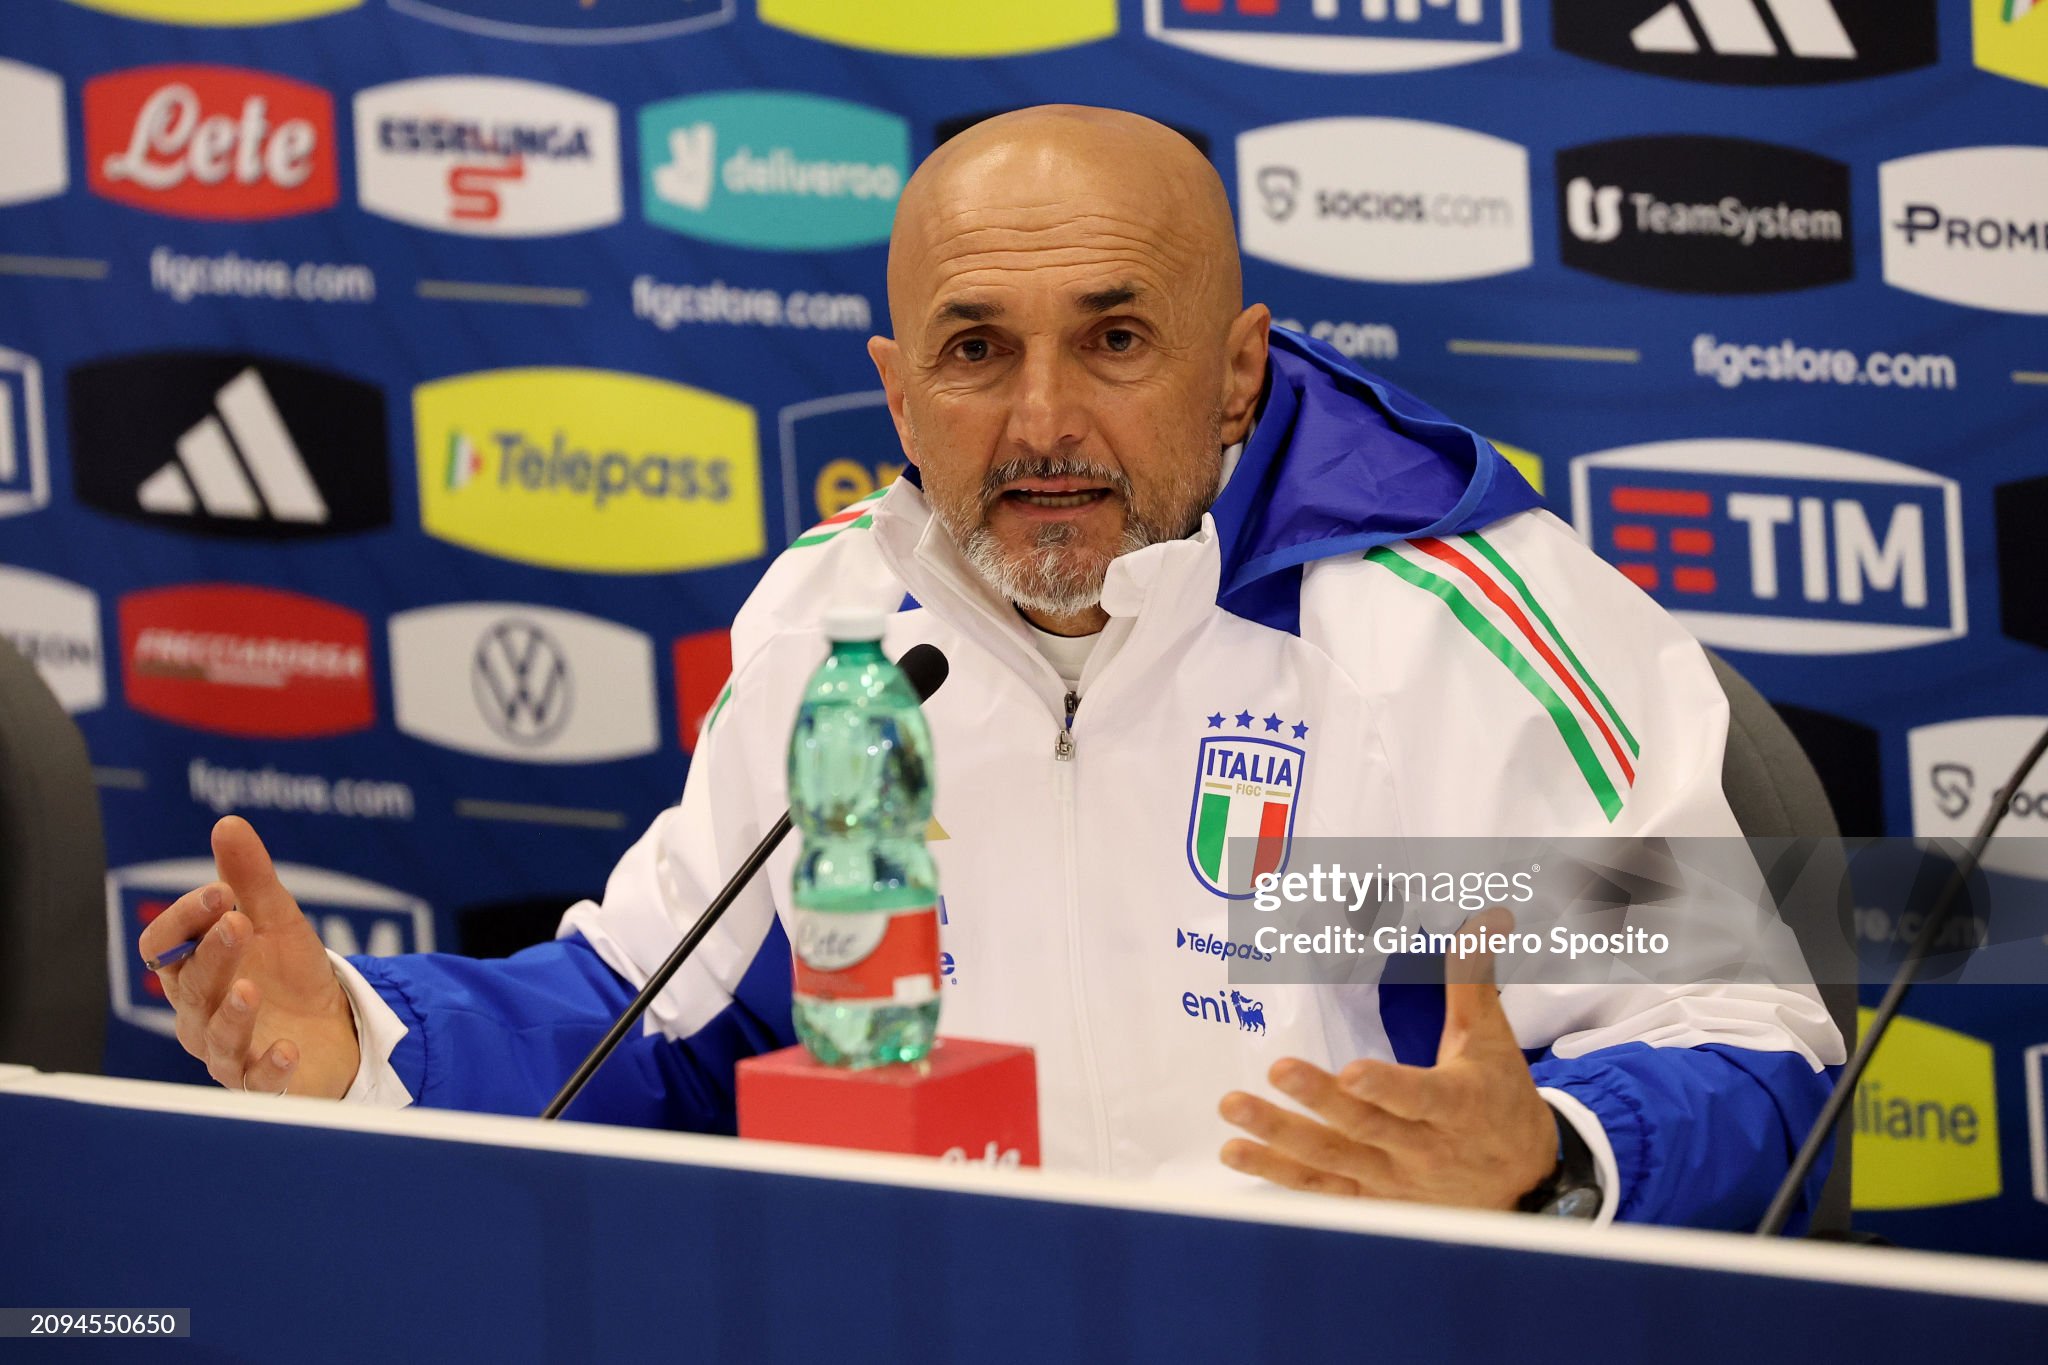 Spalletti criticizes players' leisure activities: 'No questions about PlayStation?'